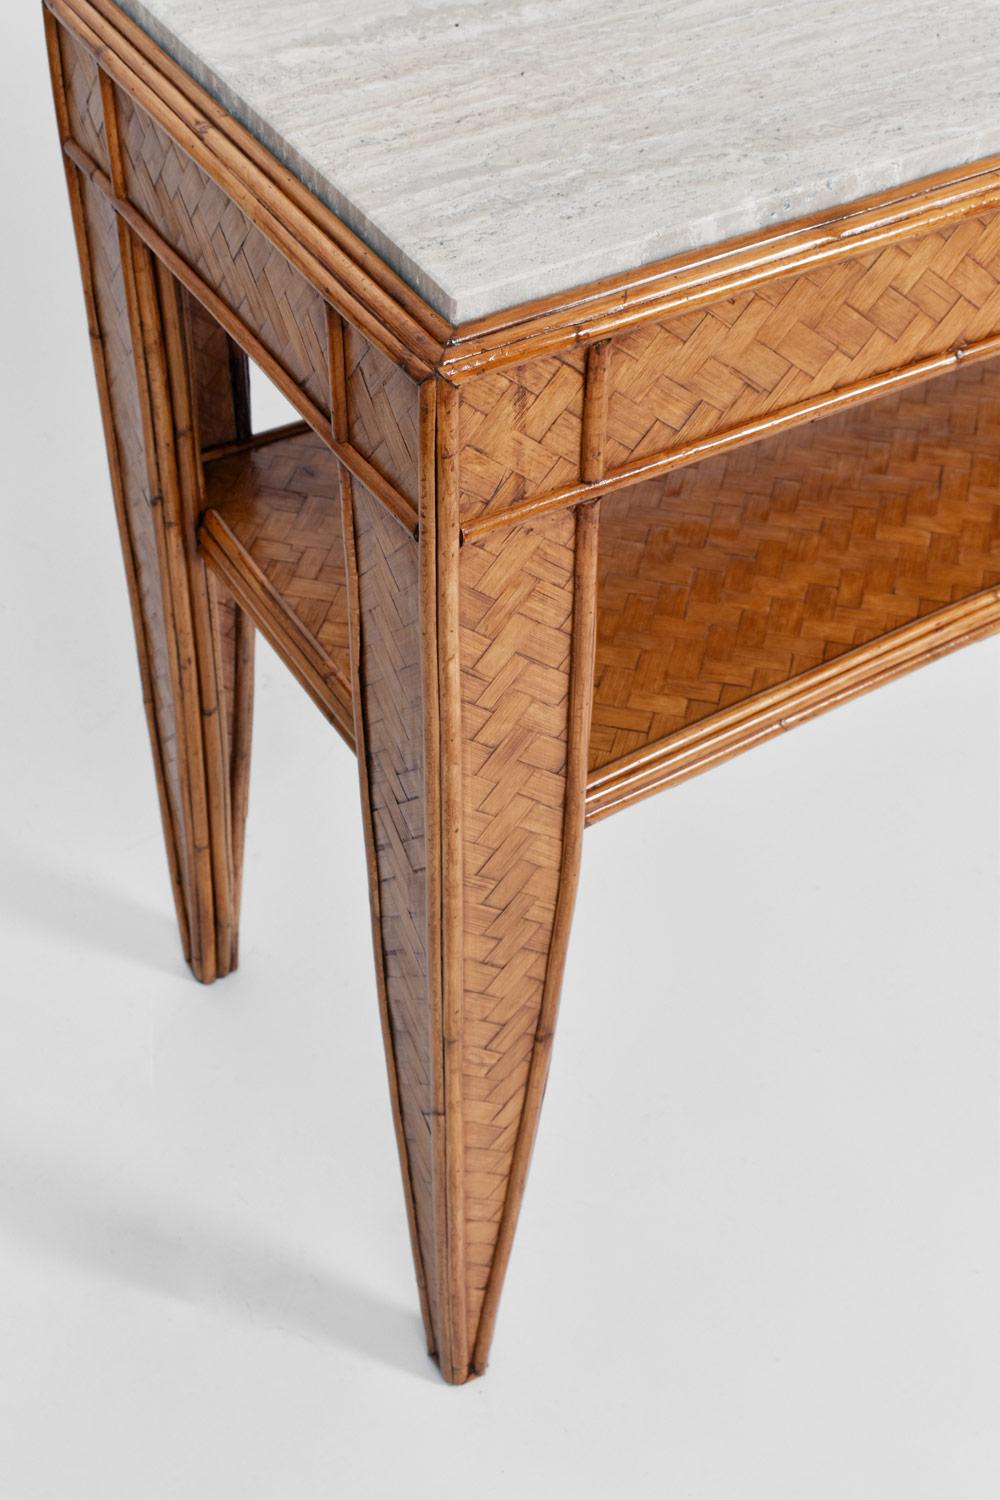 Rattan console table in tapered sheath legs joined by a spacer shelf, travertine table top. Italy, 1960s.